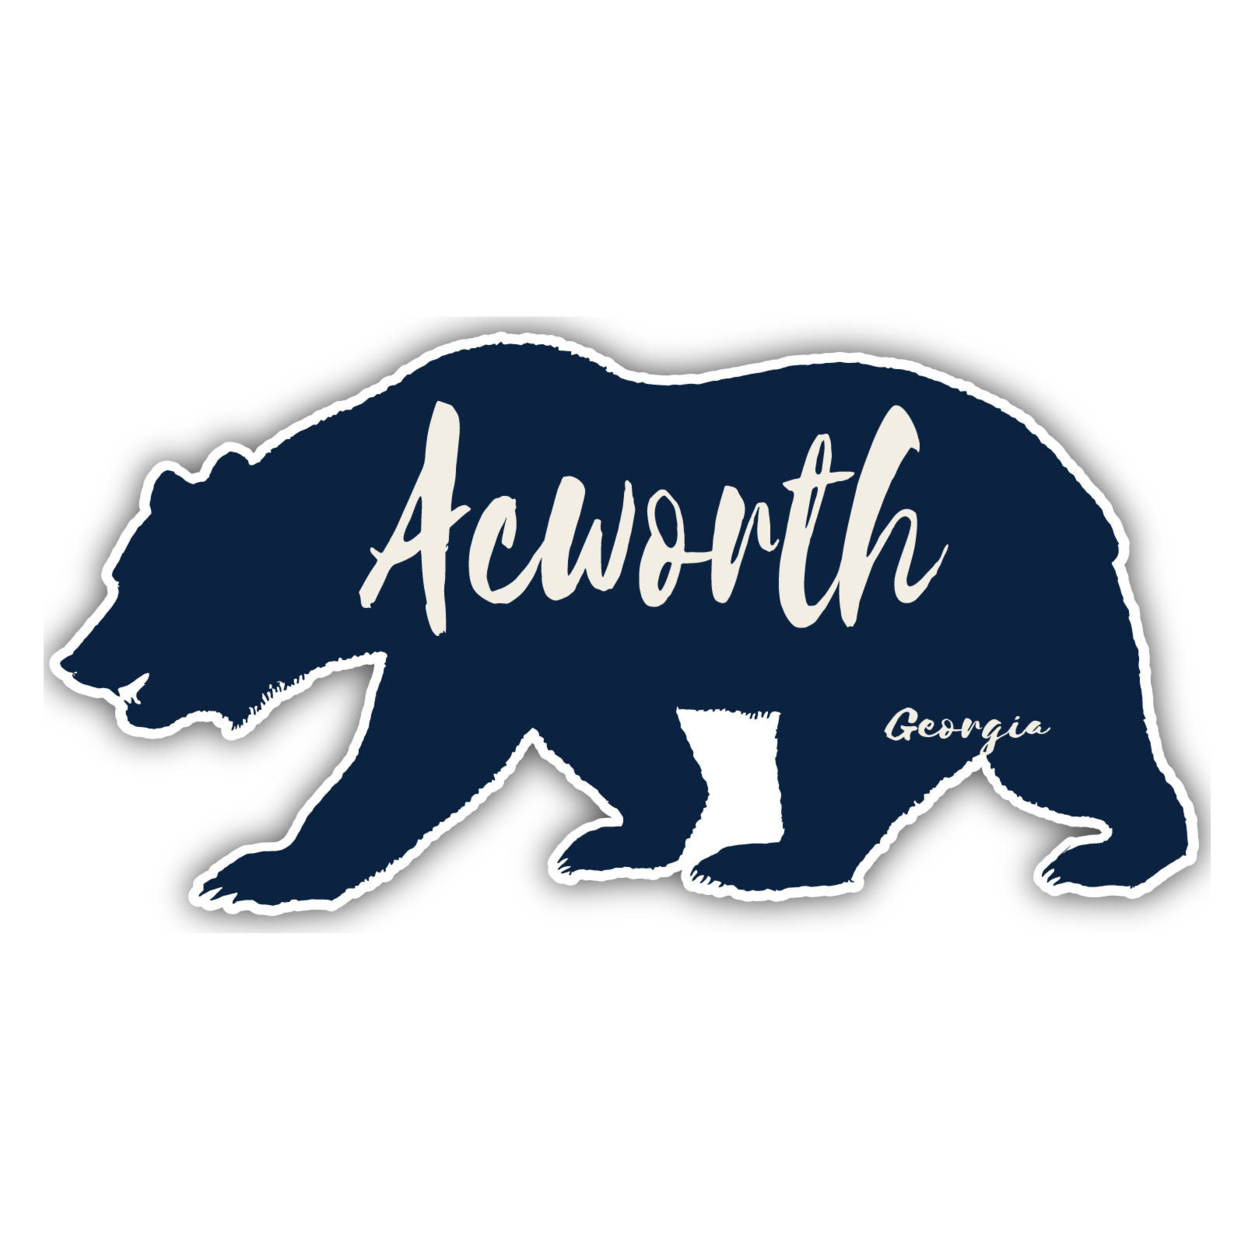 Acworth Georgia Souvenir Decorative Stickers (Choose Theme And Size) - 4-Pack, 12-Inch, Great Outdoors